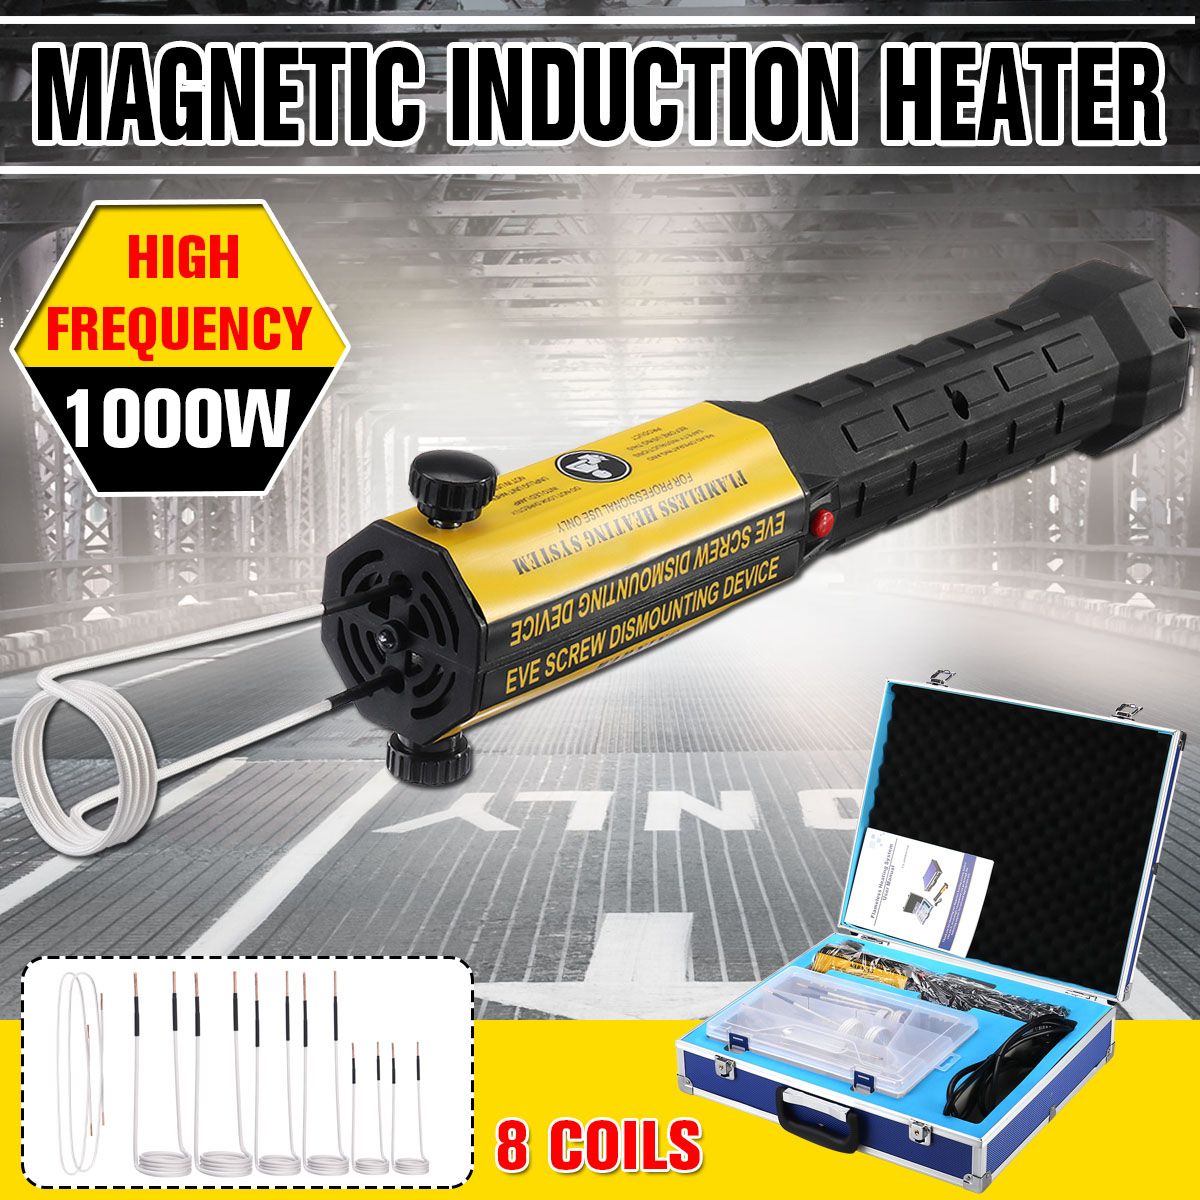 1000W-LED-Ductor-Magnetic-Induction-Heater-Car-Body-Rust-Automotive-Flameless-Heat-1585010